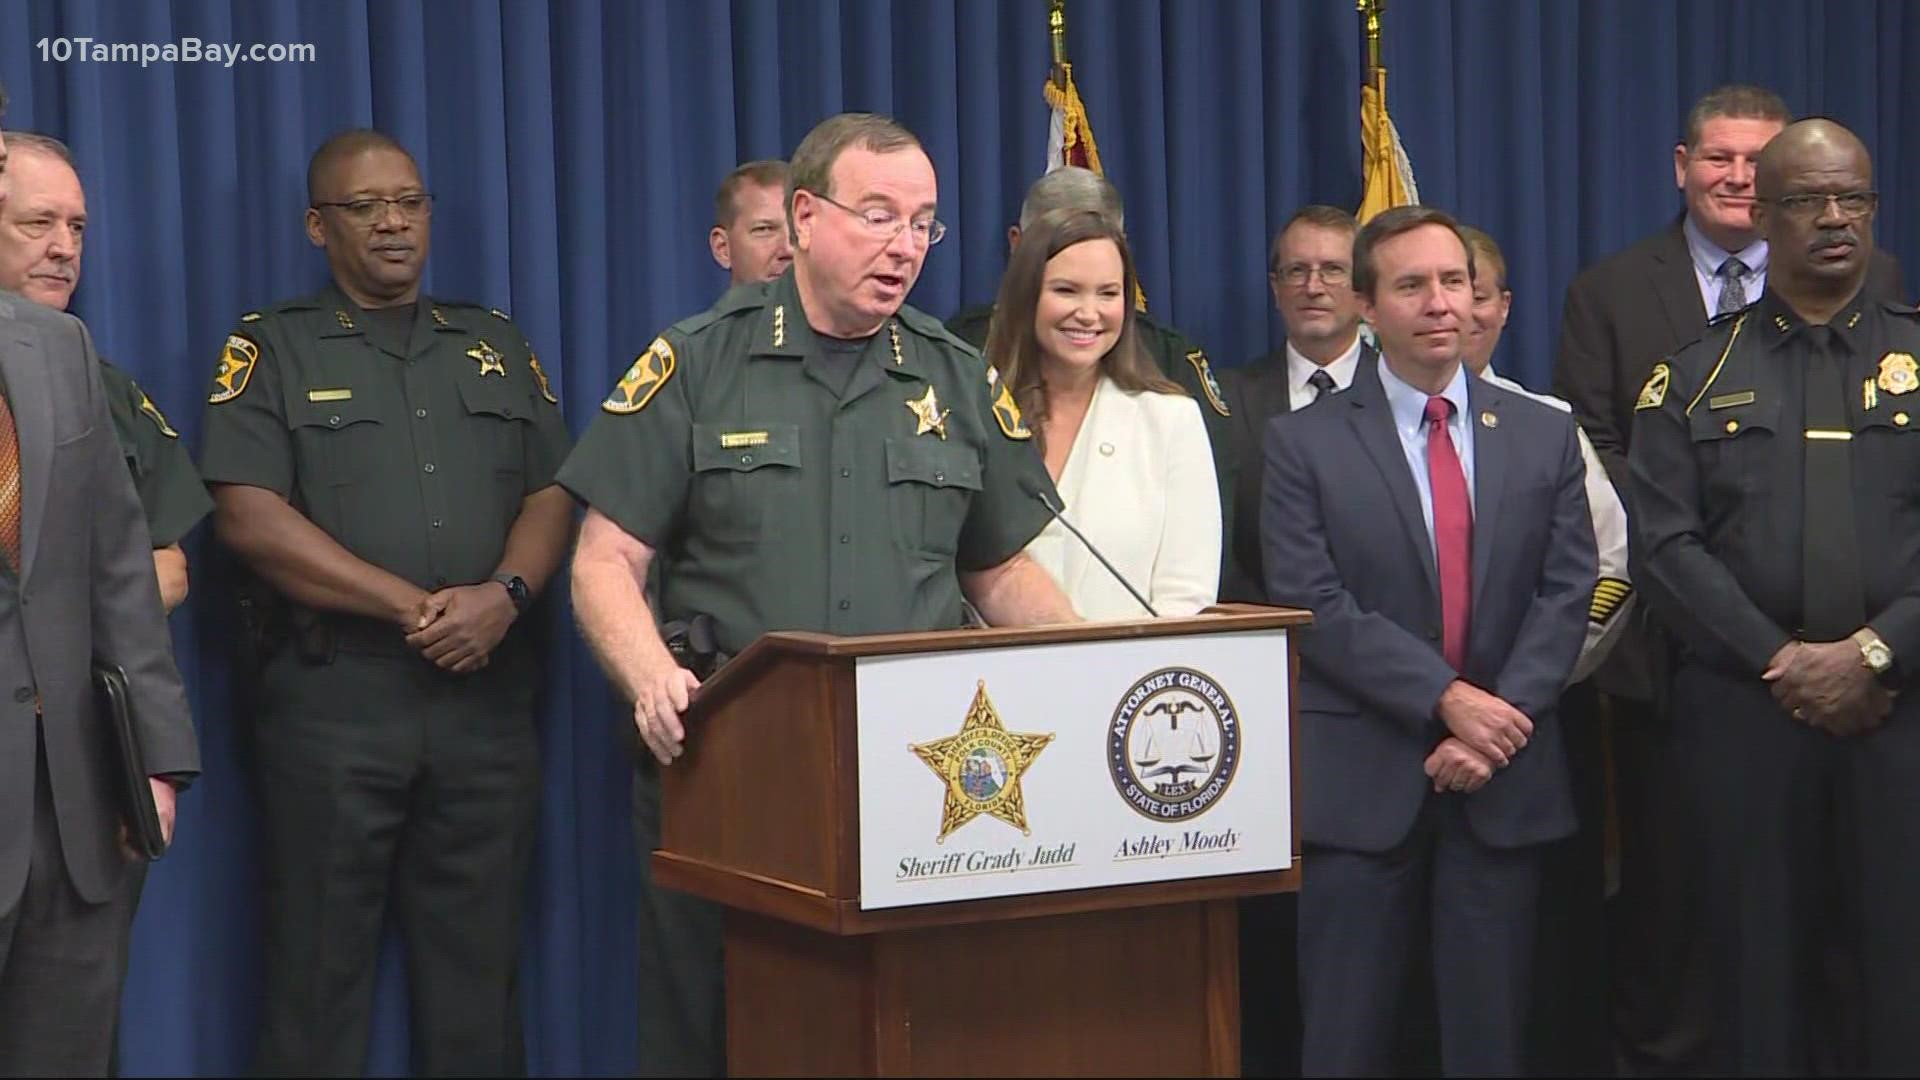 Florida's attorney general announced the formation of a new task force to help coordinate the legal response to organized retail crime.